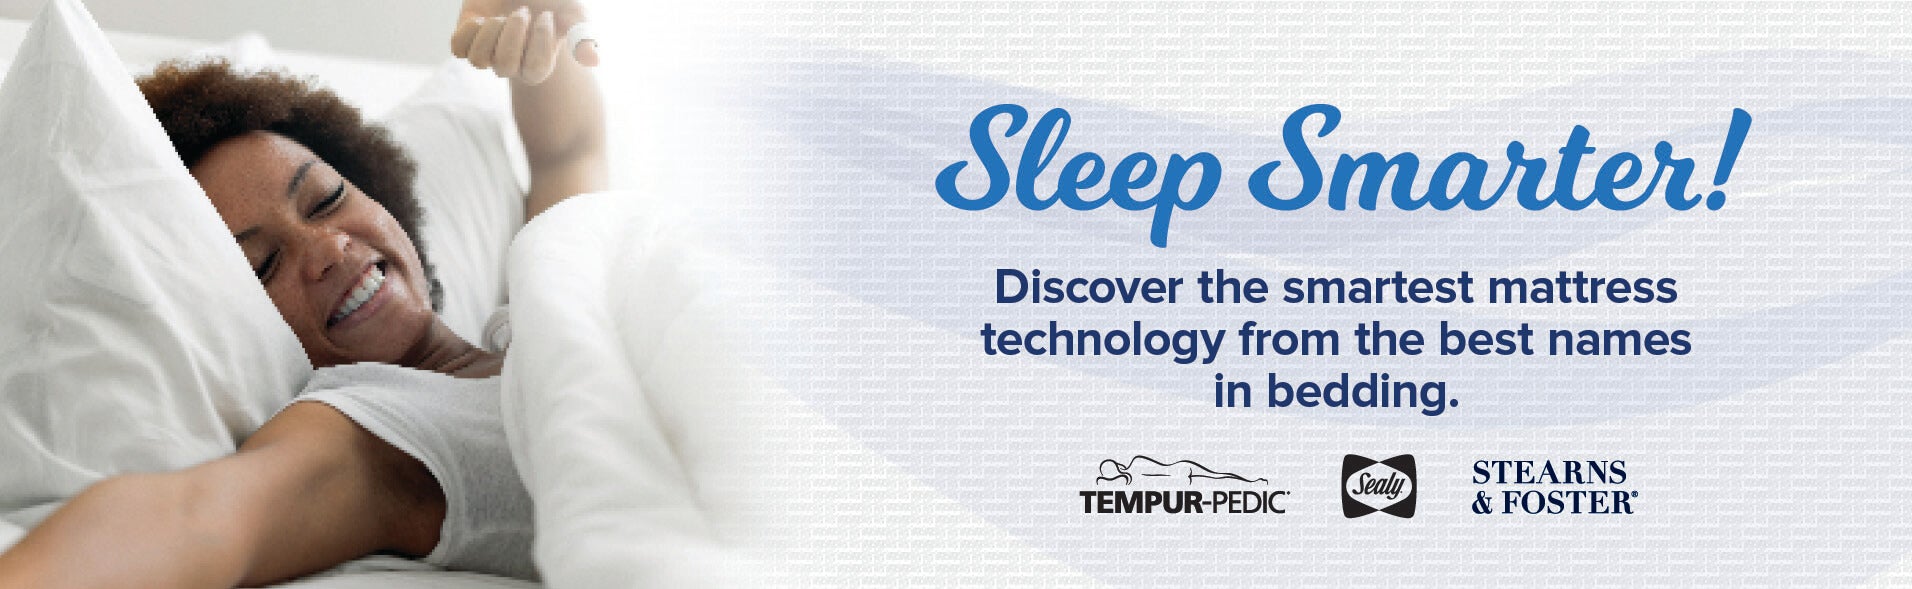 Sleep Smarter - discover the smartest mattress technology from the best names in bedding; Tempur-Pedic, Sealy and Stearns & Foster